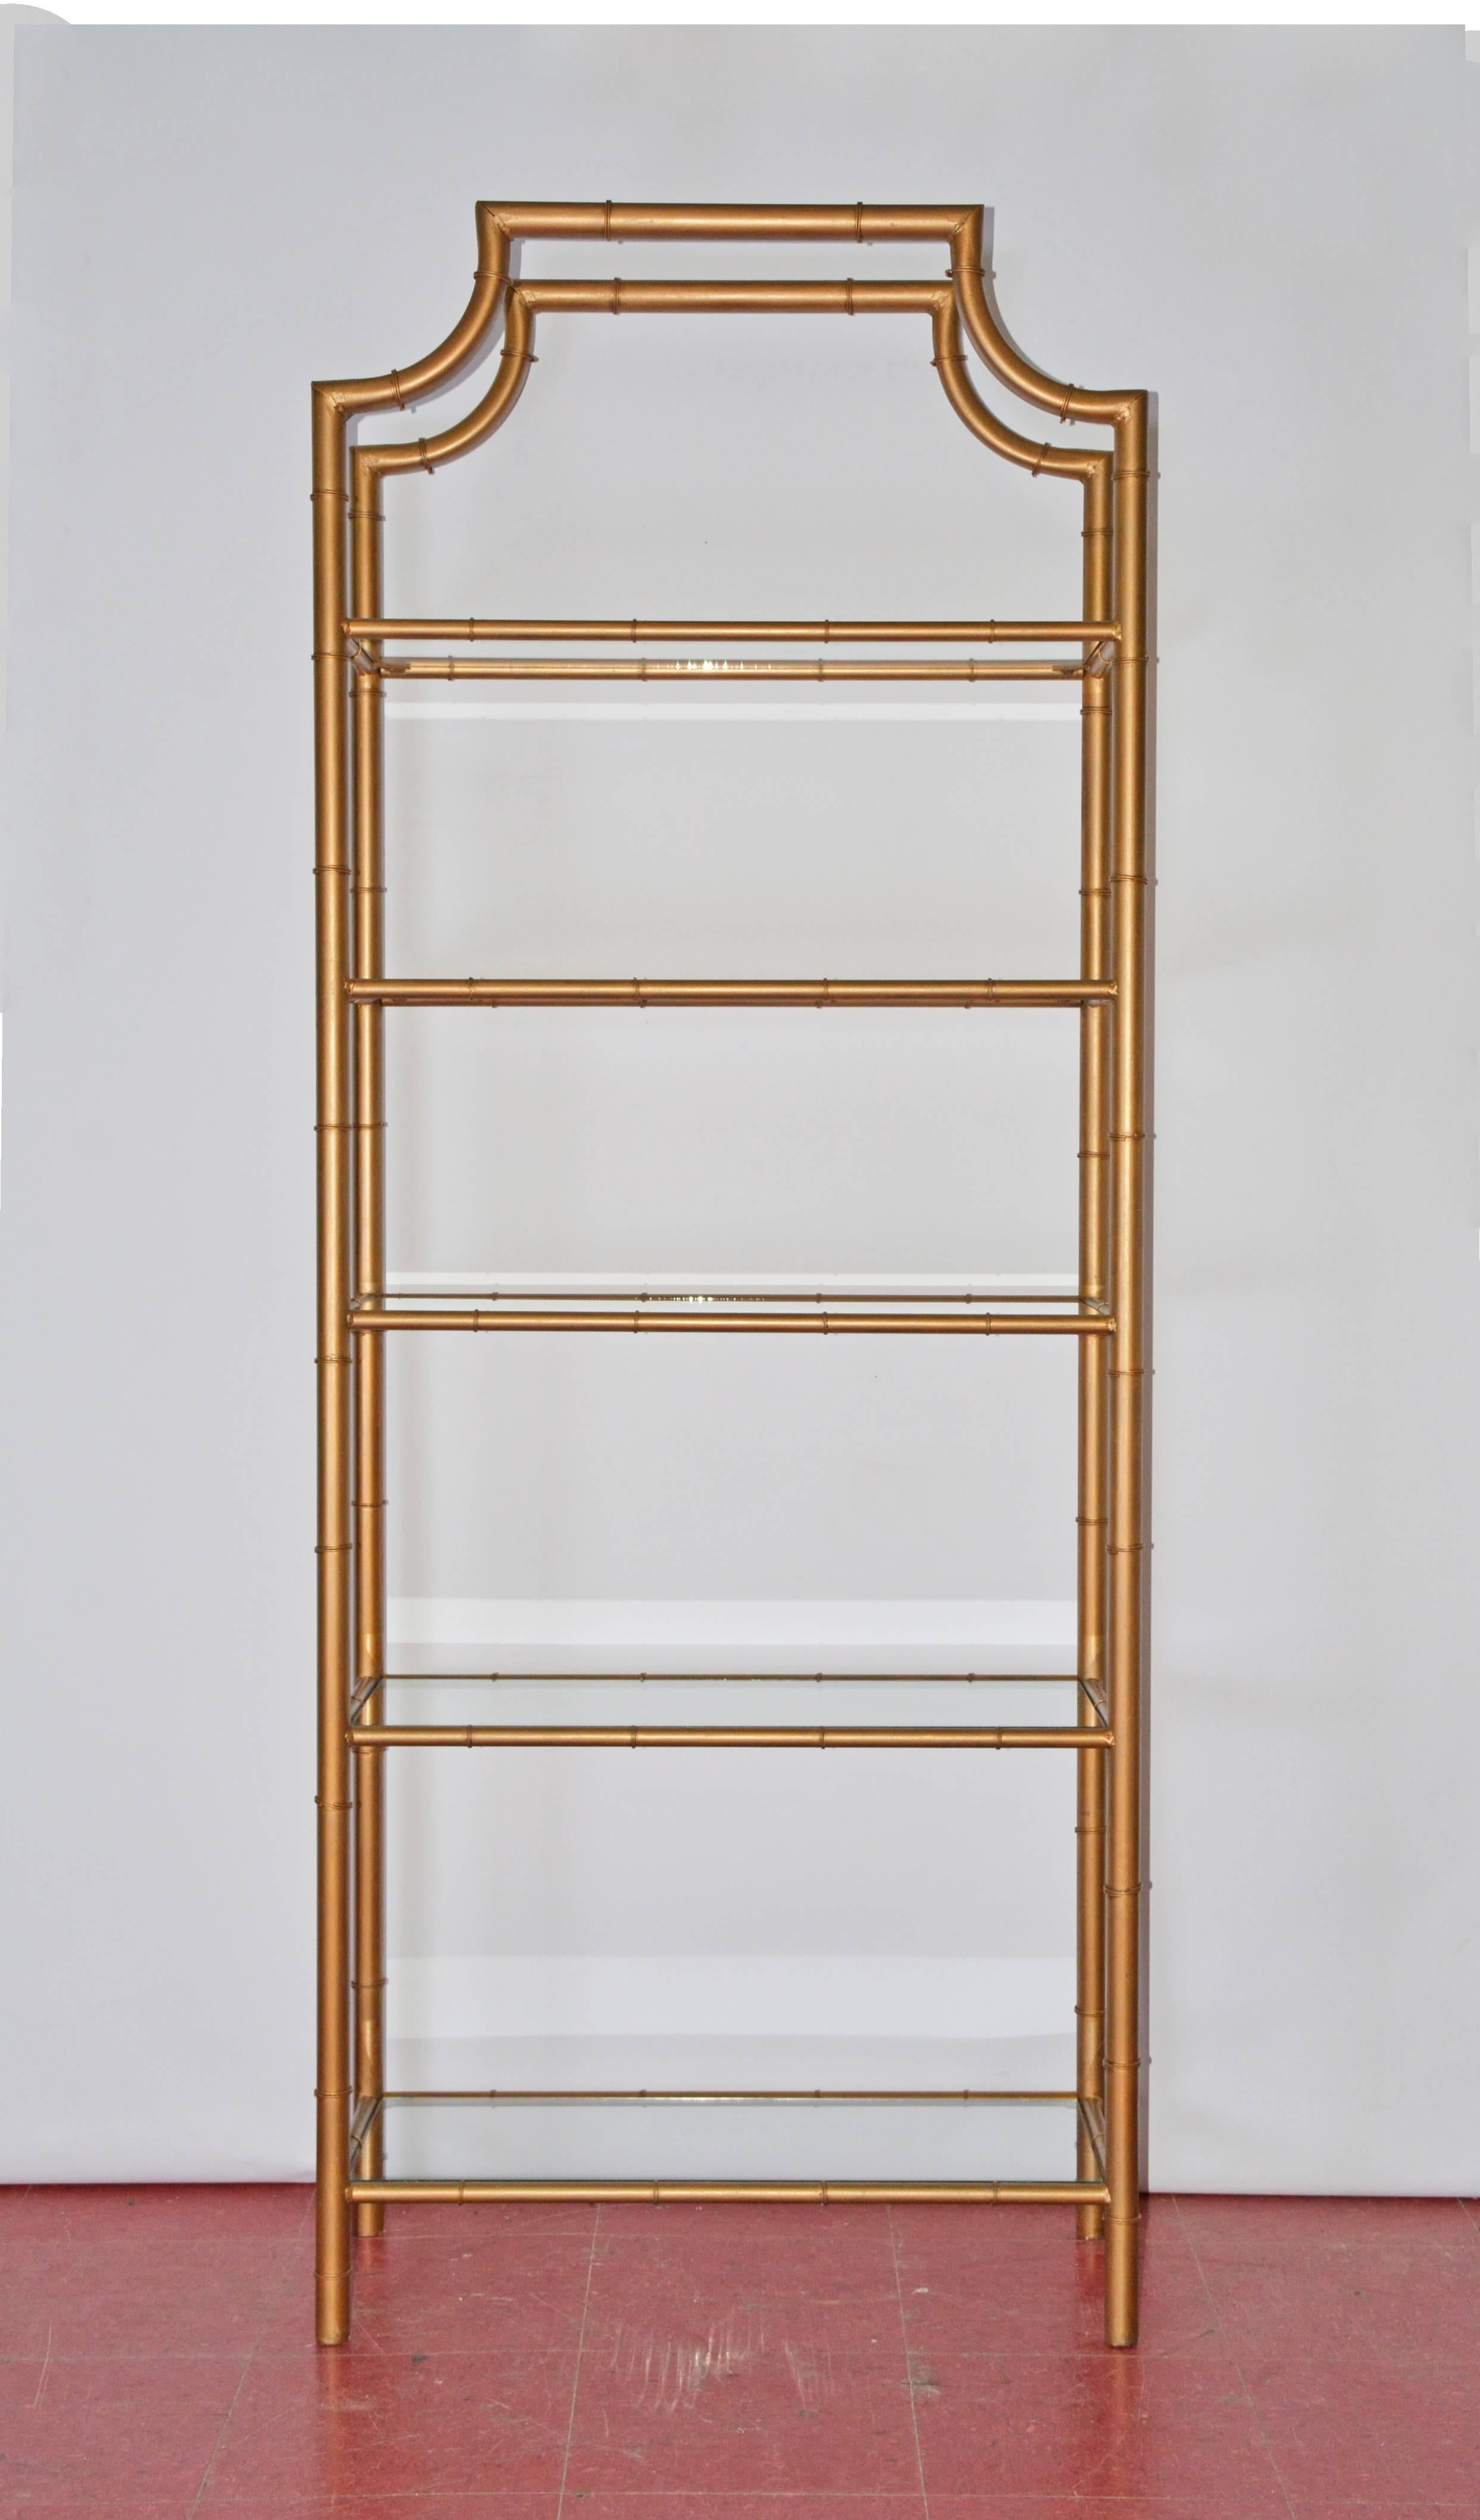 The Mid-Century faux bamboo pagoda style gold gilt metal etagere shelving unit has five glass shelves inset in frames. Great as book shelve or special decorative collection.

Height of each shelf from top to bottom: 13.50